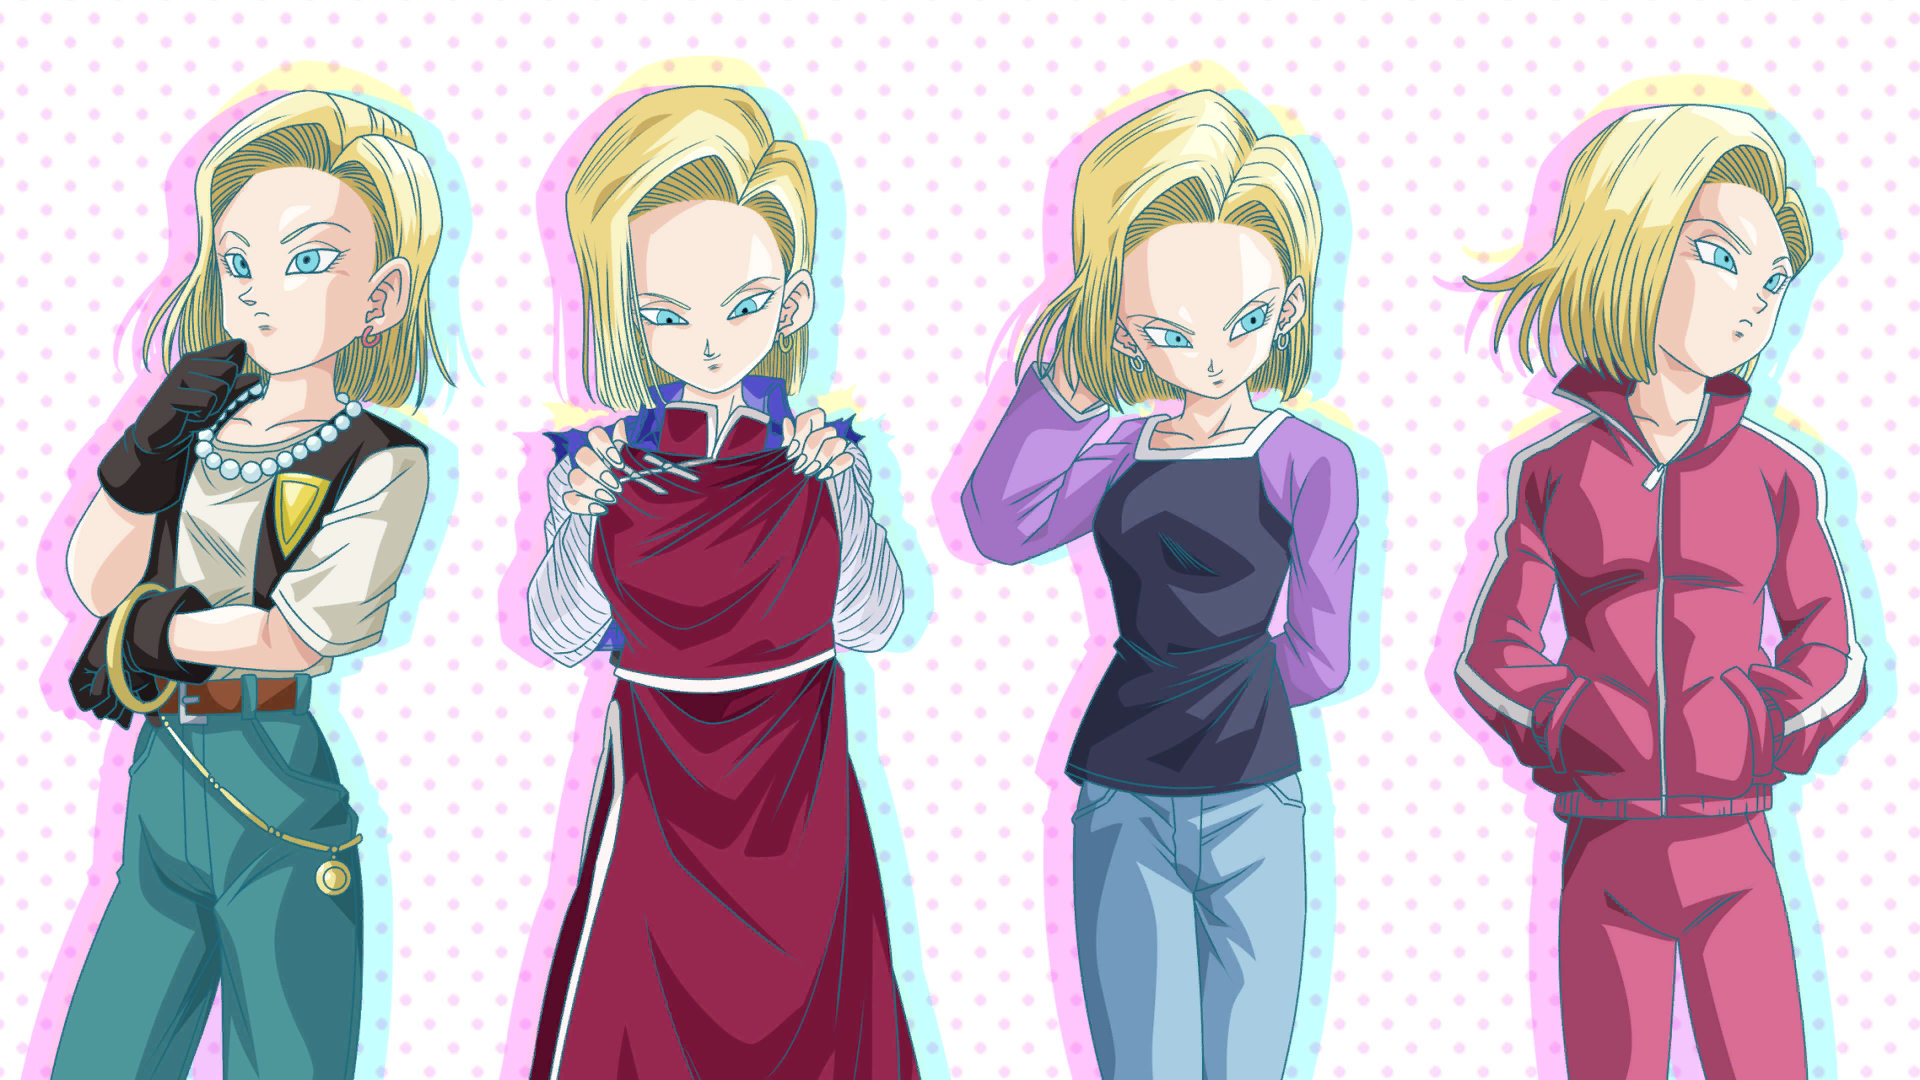 Anime 1920x1080 Dragon Ball Dragon Ball Xenoverse 2 Android 18 blonde earring gloves hands in pockets anime girls minimalism simple background pearl necklace video game art